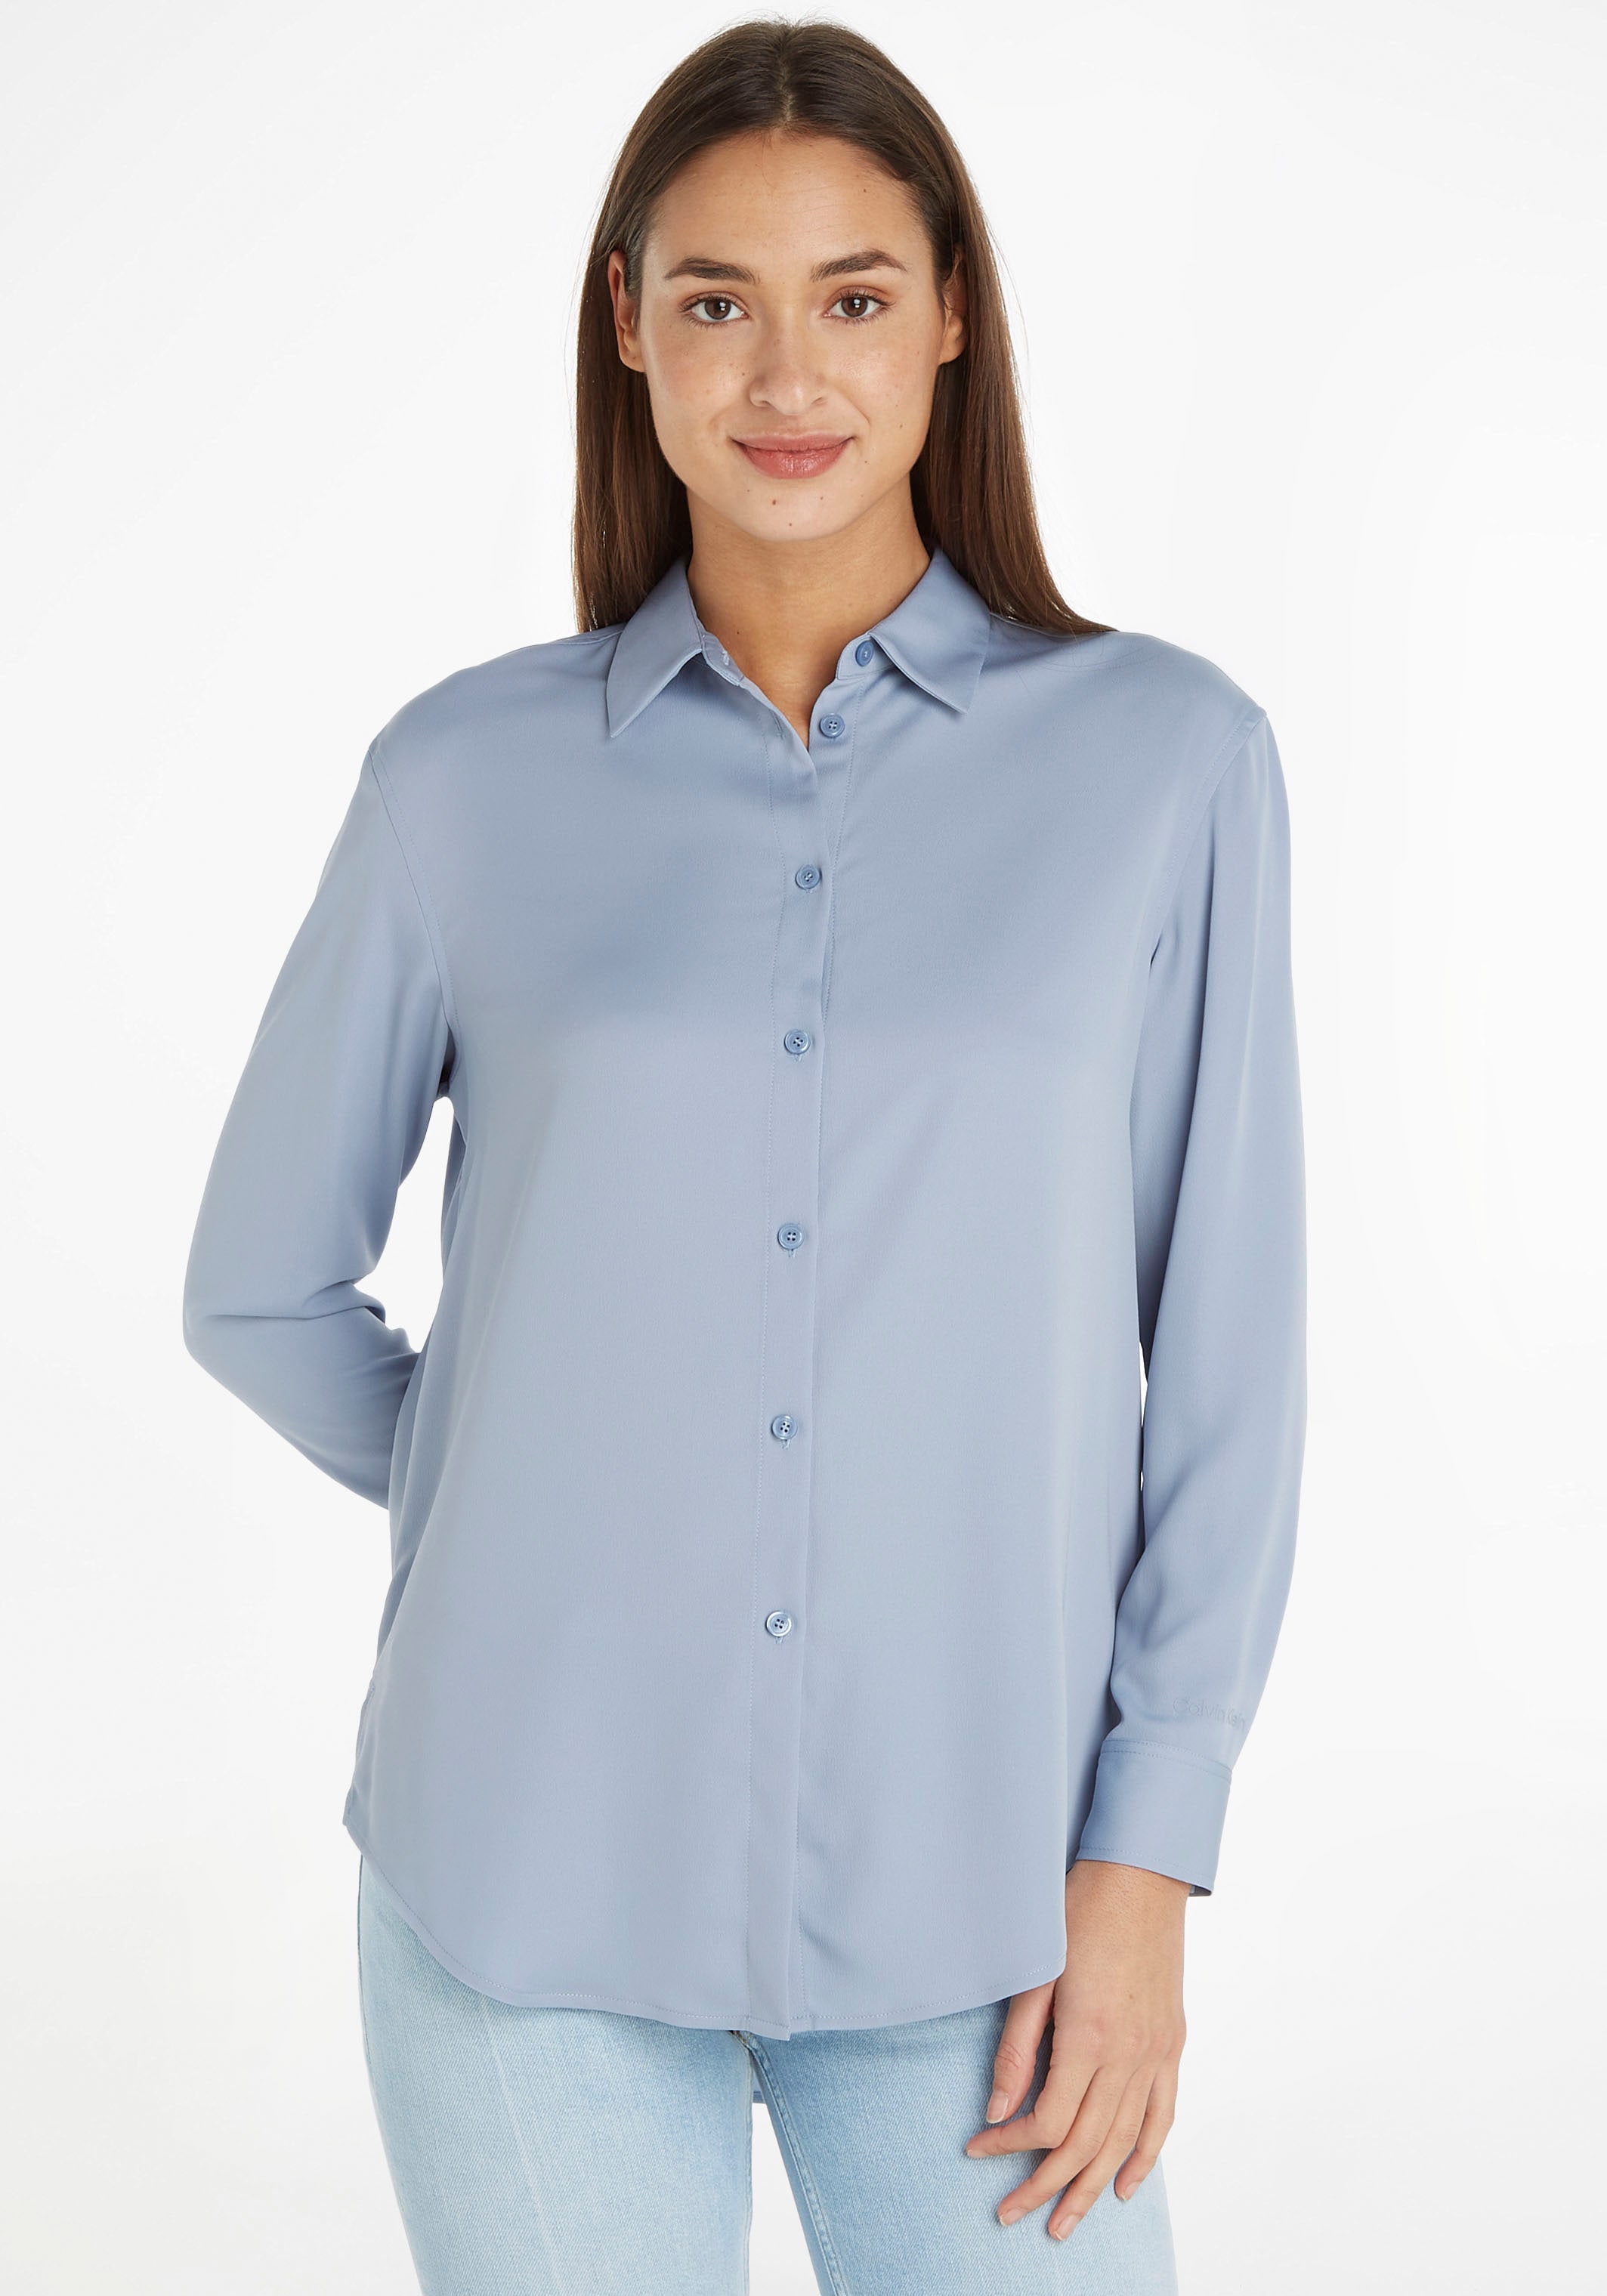 Calvin Klein Hemdbluse »RECYCLED OTTO RELAXED im bei Vokuhila-Style online SHIRT«, CDC